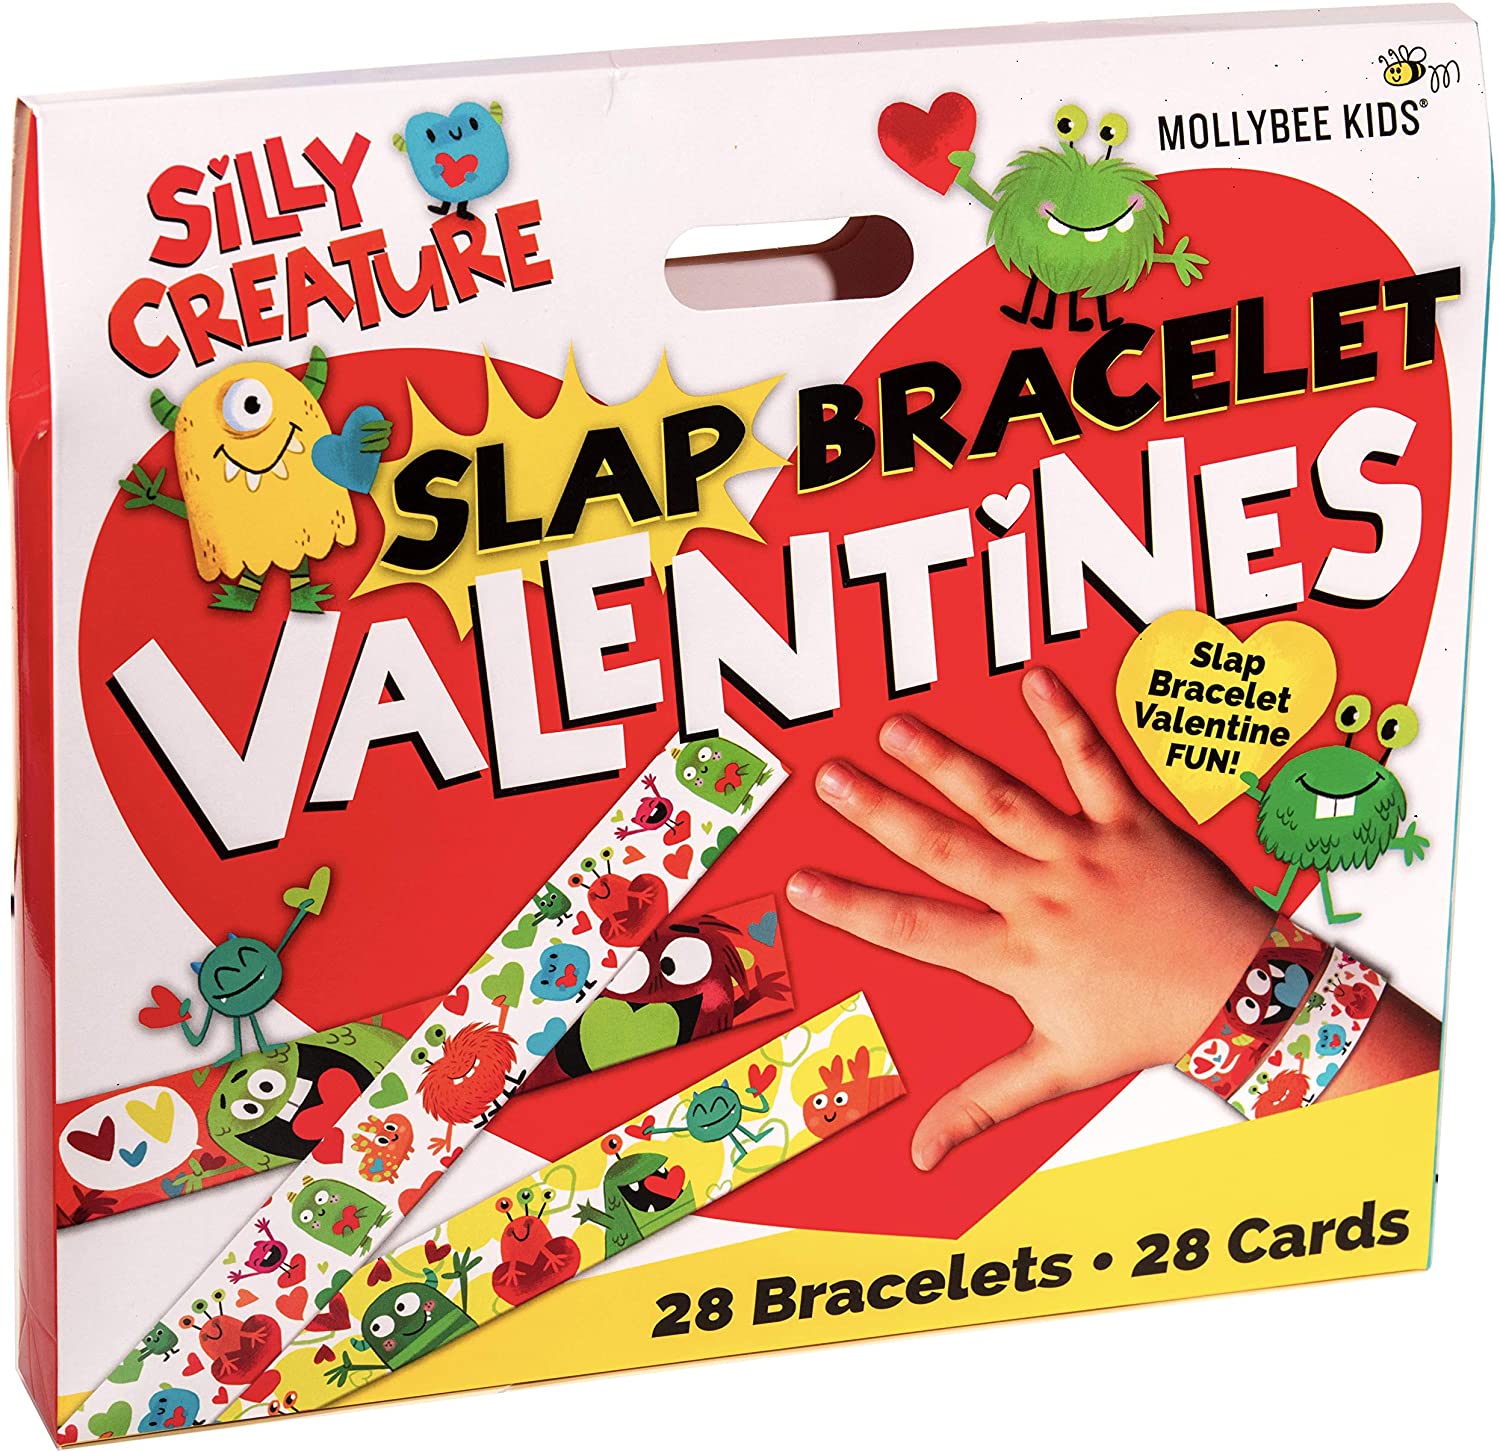 Silly Creature Valentines Slap Bracelets and Cards - Mollybee Kids